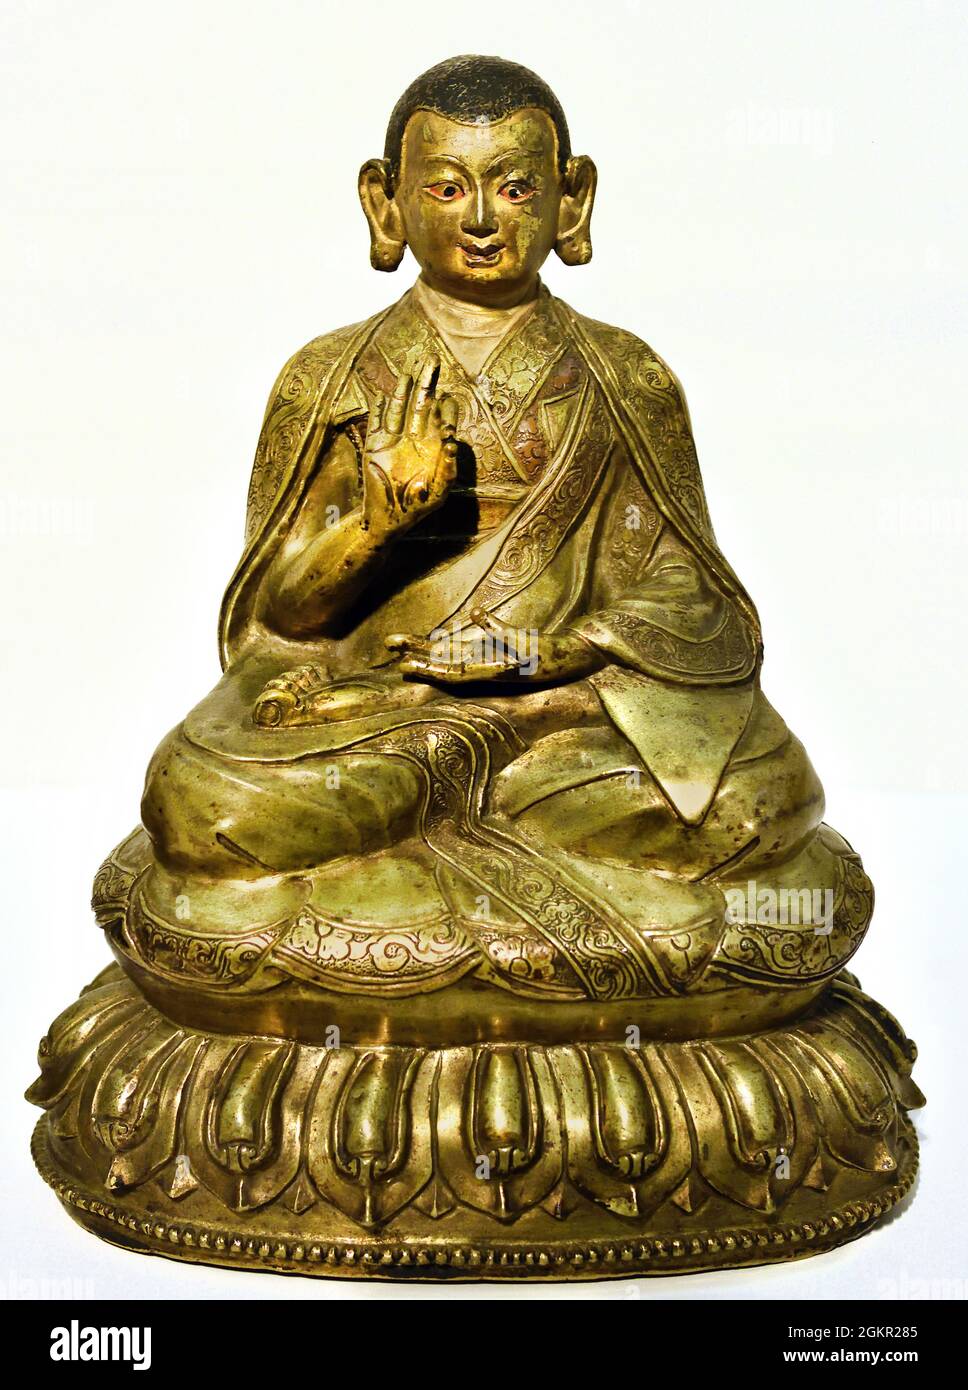 Lama Dpal ldan tshul khrims 1500 - 1699copper, 16.8cm × 13.8cm × 9.5cm,  Central Tibet, Image of the lama Dpal ldan tshul khrims (1333-1399), one of  the masters in the transmission of